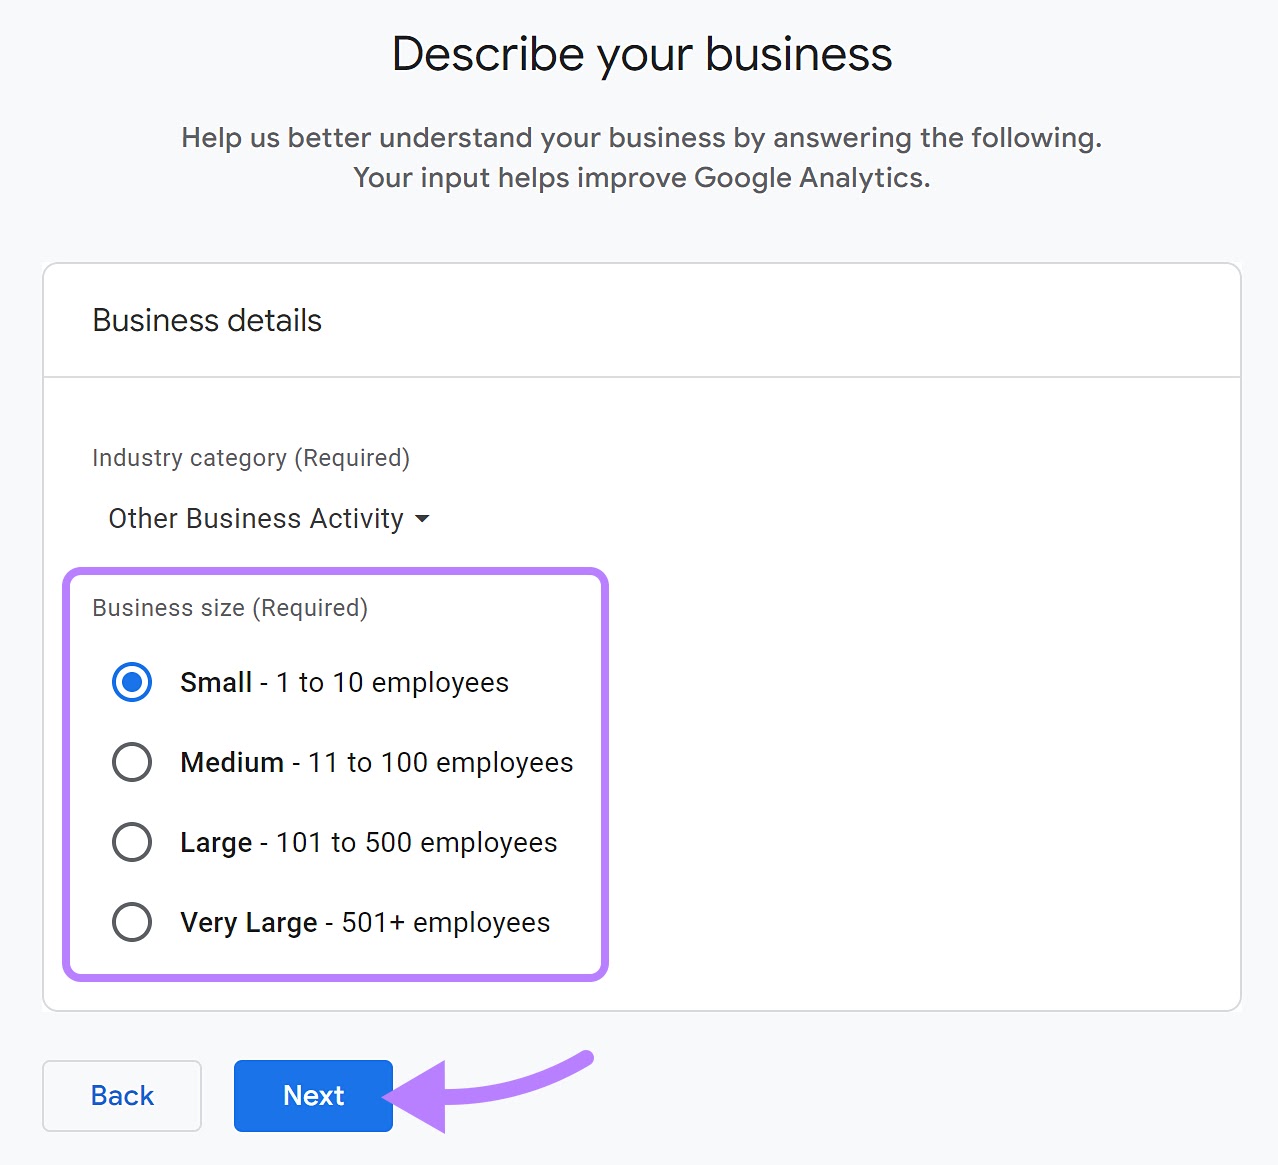 "Small - 1 to 10 employees" options selected under "Business size" drop-down menu